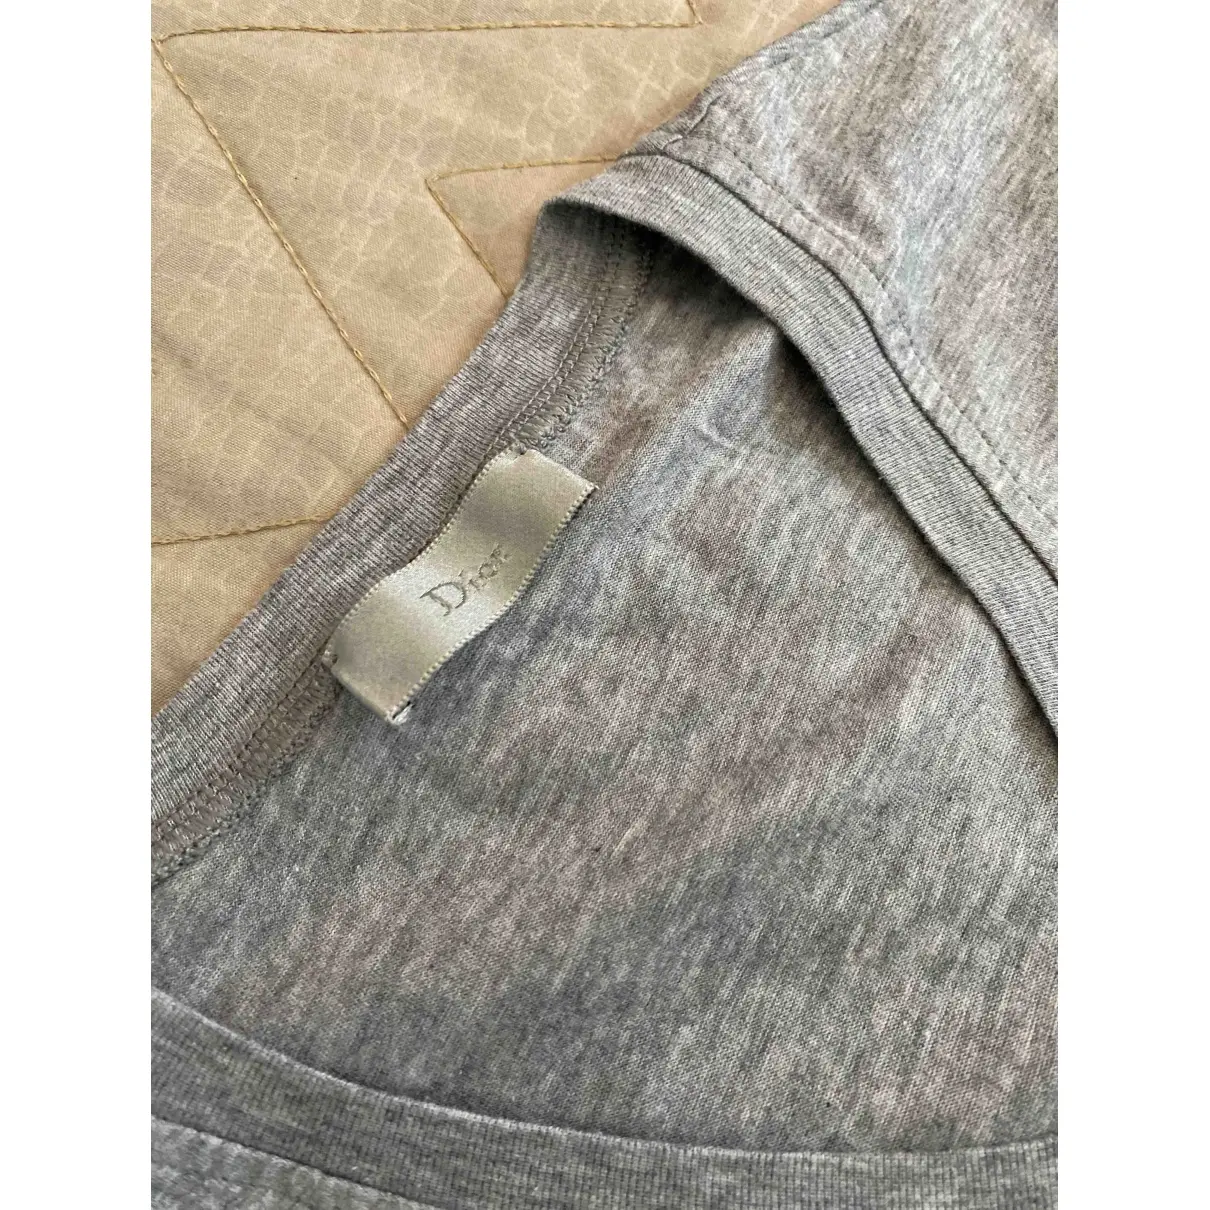 Dior Homme Grey Cotton T-shirt for sale